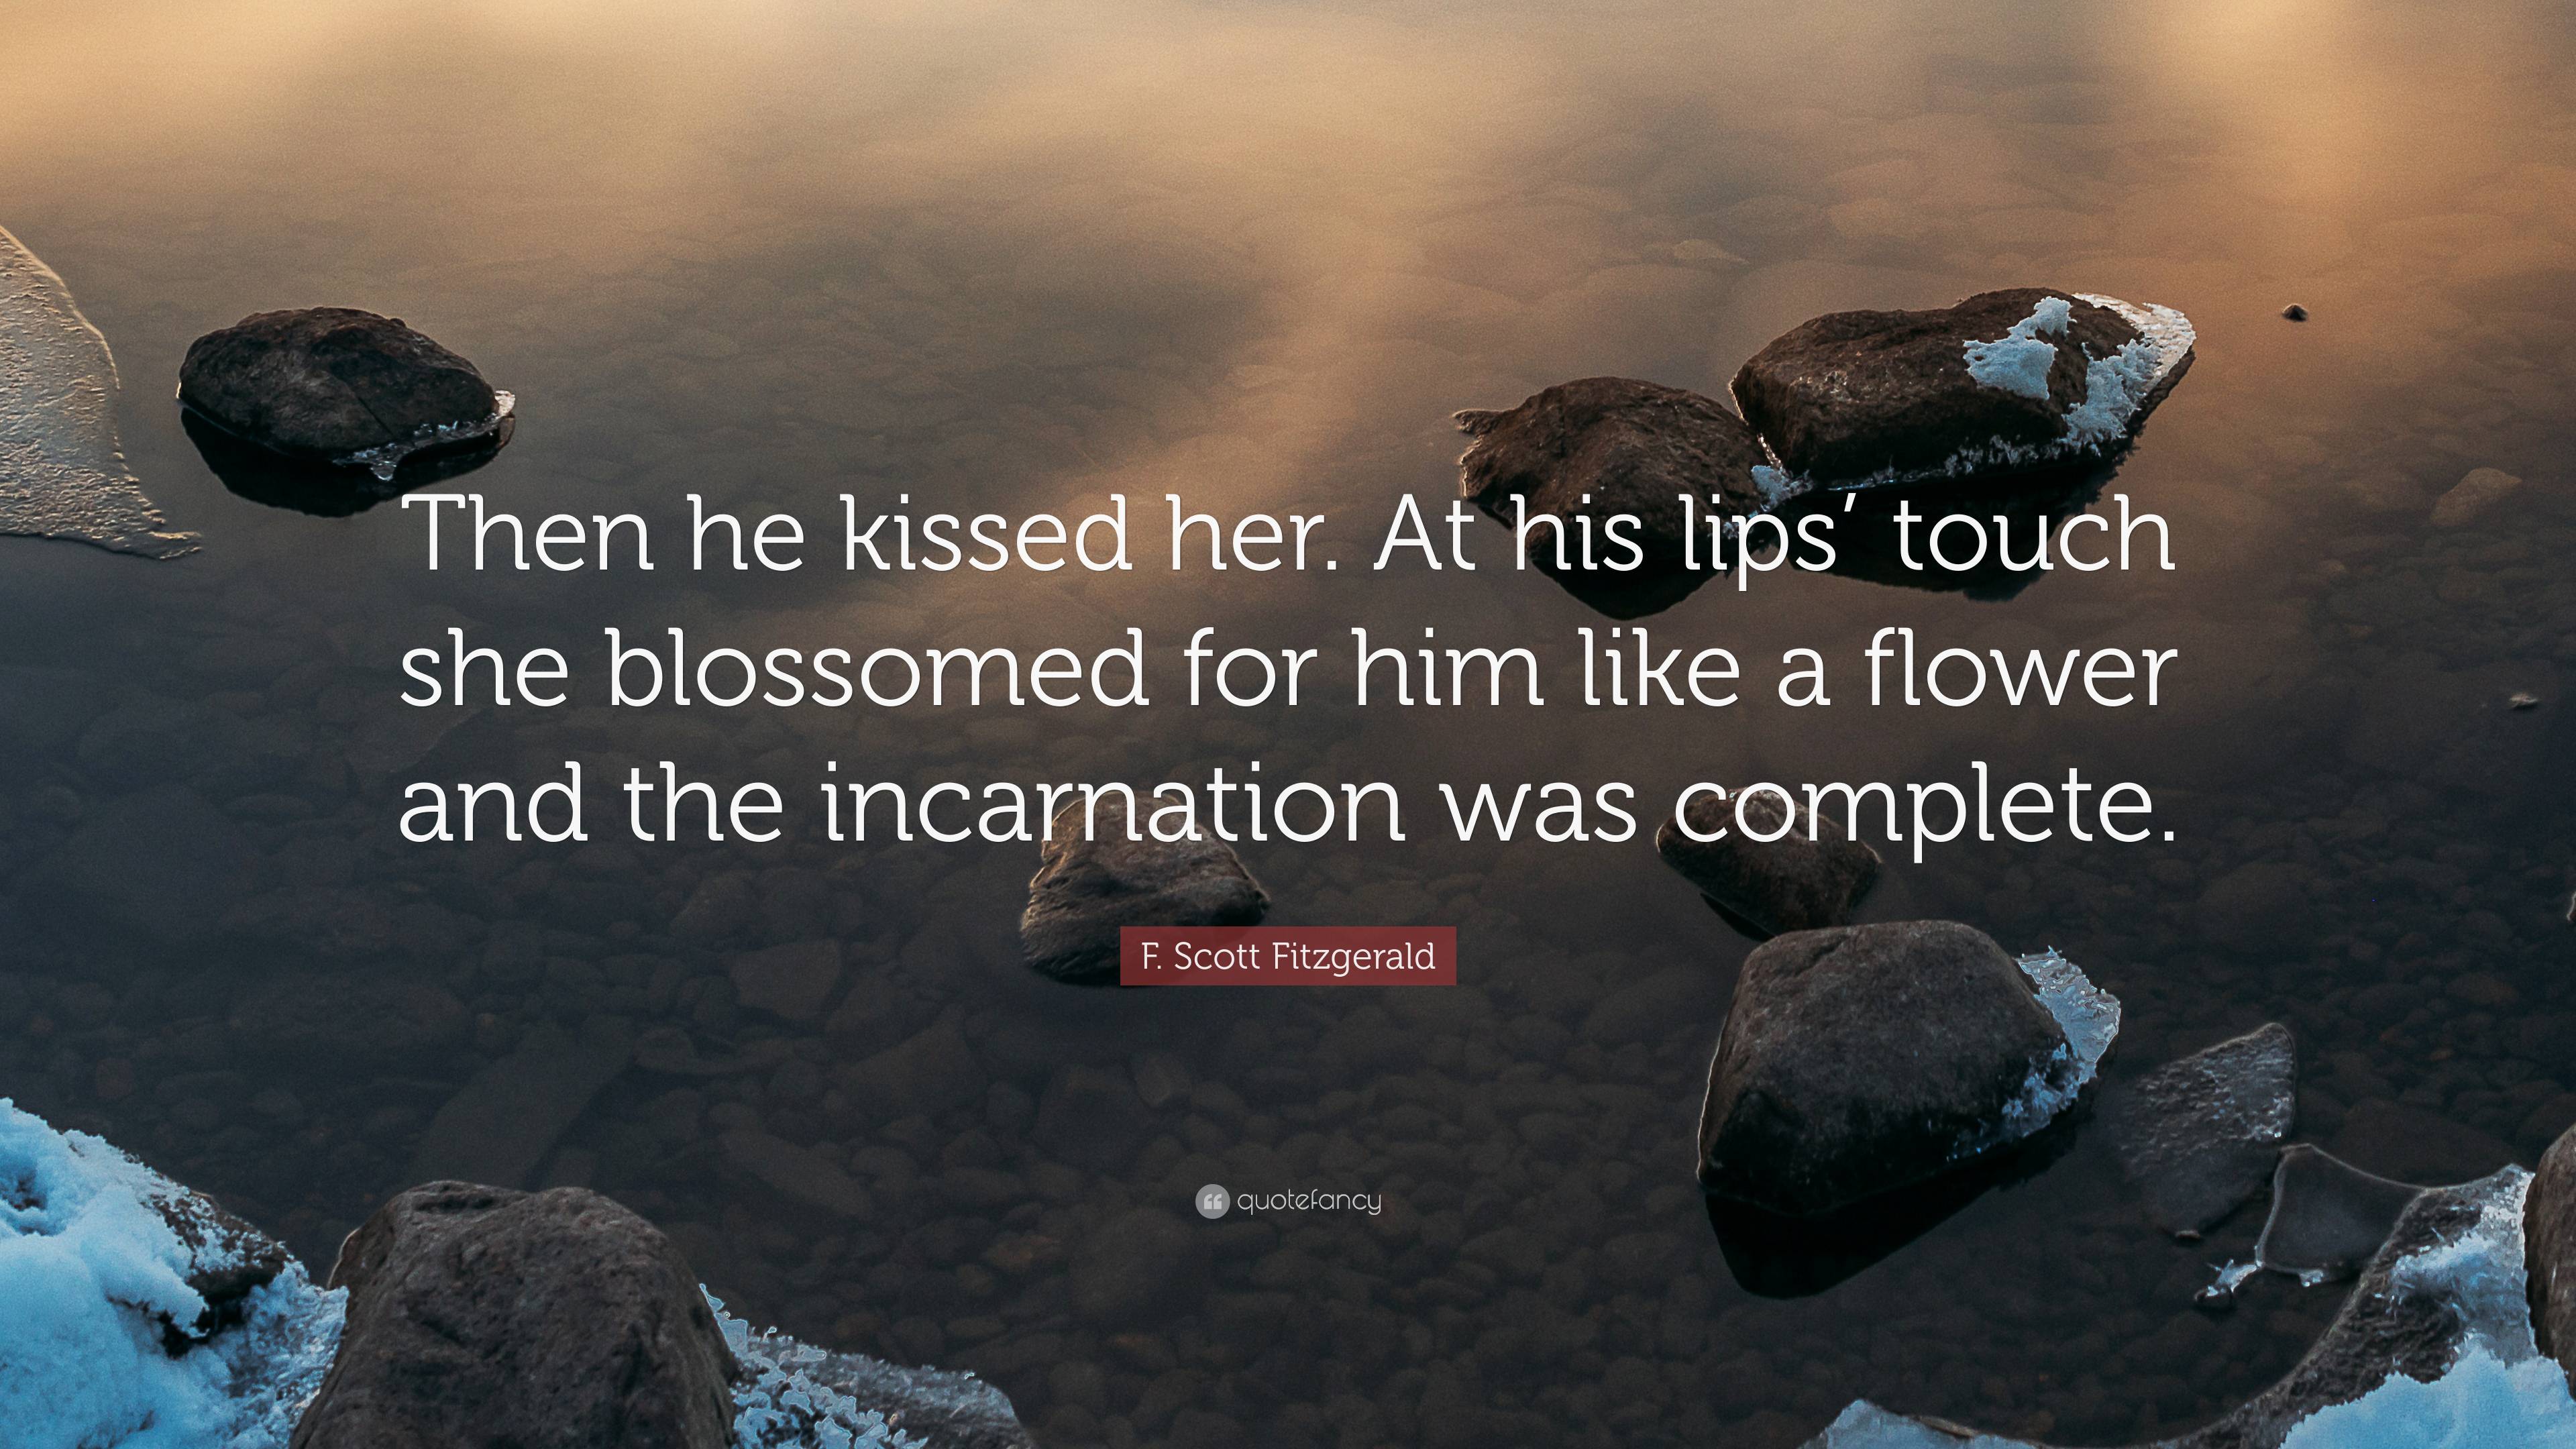 F Scott Fitzgerald Quote “then He Kissed Her At His Lips Touch She Blossomed For Him Like A